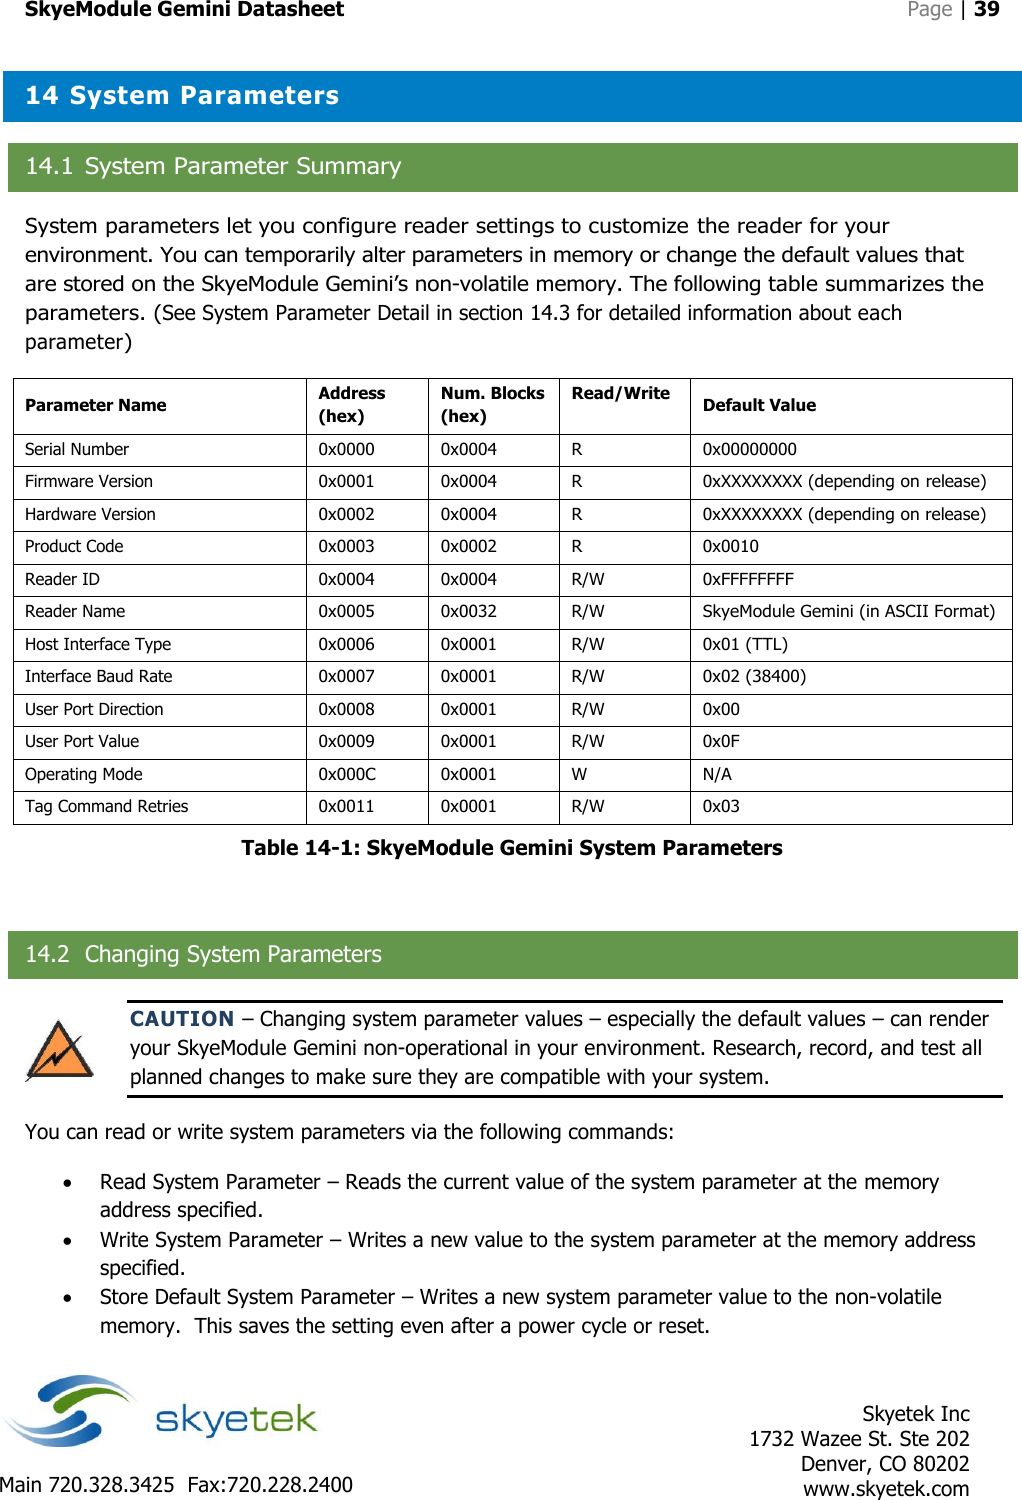 SkyeModule Gemini Datasheet   Page | 39    Skyetek Inc 1732 Wazee St. Ste 202 Denver, CO 80202 www.skyetek.com Main 720.328.3425  Fax:720.228.2400  14 System Parameters 14.1 System Parameter Summary System parameters let you configure reader settings to customize the reader for your environment. You can temporarily alter parameters in memory or change the default values that are stored on the SkyeModule Gemini’s non-volatile memory. The following table summarizes the parameters. (See System Parameter Detail in section 14.3 for detailed information about each parameter) Parameter Name Address (hex) Num. Blocks (hex) Read/Write Default Value Serial Number 0x0000 0x0004 R 0x00000000 Firmware Version 0x0001 0x0004 R 0xXXXXXXXX (depending on release) Hardware Version 0x0002 0x0004 R 0xXXXXXXXX (depending on release) Product Code 0x0003 0x0002 R 0x0010 Reader ID 0x0004 0x0004 R/W 0xFFFFFFFF Reader Name 0x0005 0x0032 R/W SkyeModule Gemini (in ASCII Format) Host Interface Type 0x0006 0x0001 R/W 0x01 (TTL) Interface Baud Rate 0x0007 0x0001 R/W 0x02 (38400) User Port Direction 0x0008 0x0001 R/W 0x00 User Port Value 0x0009 0x0001 R/W 0x0F Operating Mode 0x000C 0x0001 W N/A Tag Command Retries 0x0011 0x0001 R/W 0x03 Table 14-1: SkyeModule Gemini System Parameters  14.2 Changing System Parameters CAUTION – Changing system parameter values – especially the default values – can render your SkyeModule Gemini non-operational in your environment. Research, record, and test all planned changes to make sure they are compatible with your system. You can read or write system parameters via the following commands:  Read System Parameter – Reads the current value of the system parameter at the memory address specified.  Write System Parameter – Writes a new value to the system parameter at the memory address specified.  Store Default System Parameter – Writes a new system parameter value to the non-volatile memory.  This saves the setting even after a power cycle or reset. 